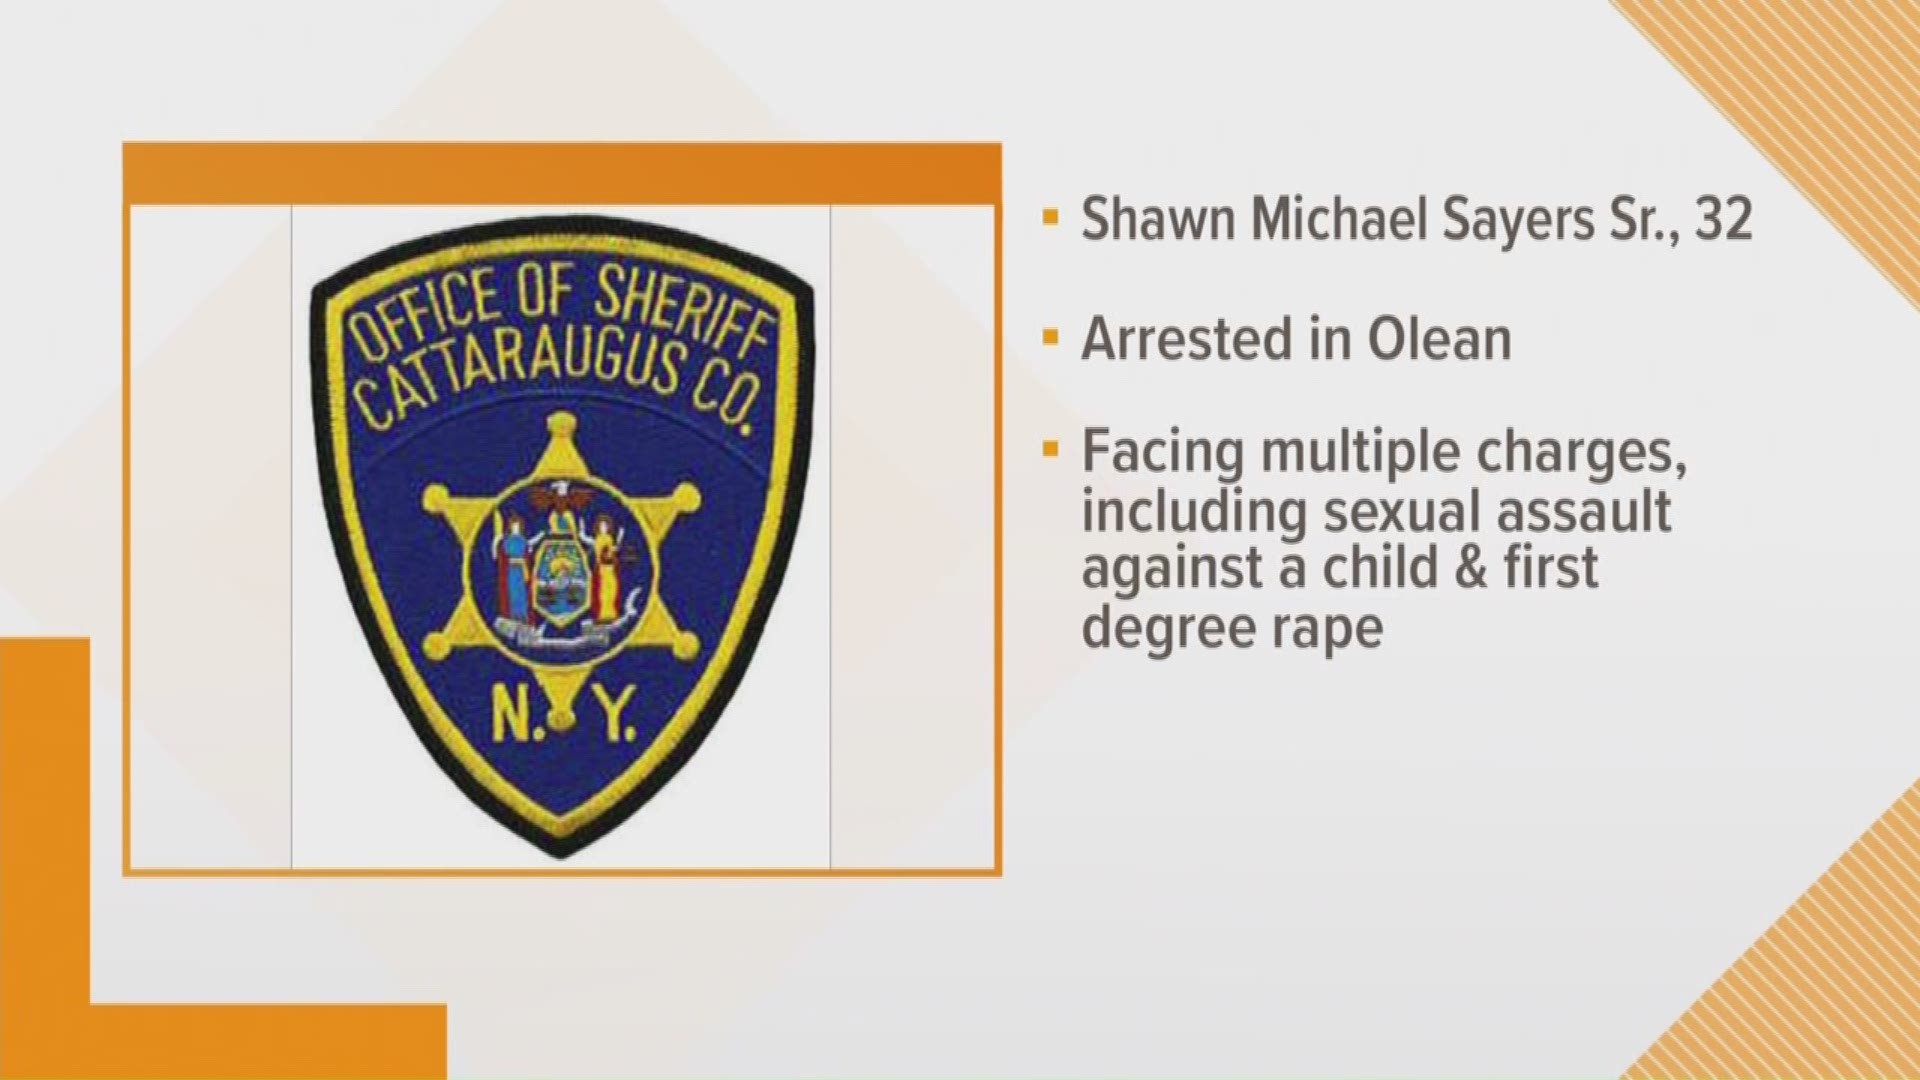 Shawn Michael Sayers, Sr. faces multiple charges for alleged sexual abuse of a child.